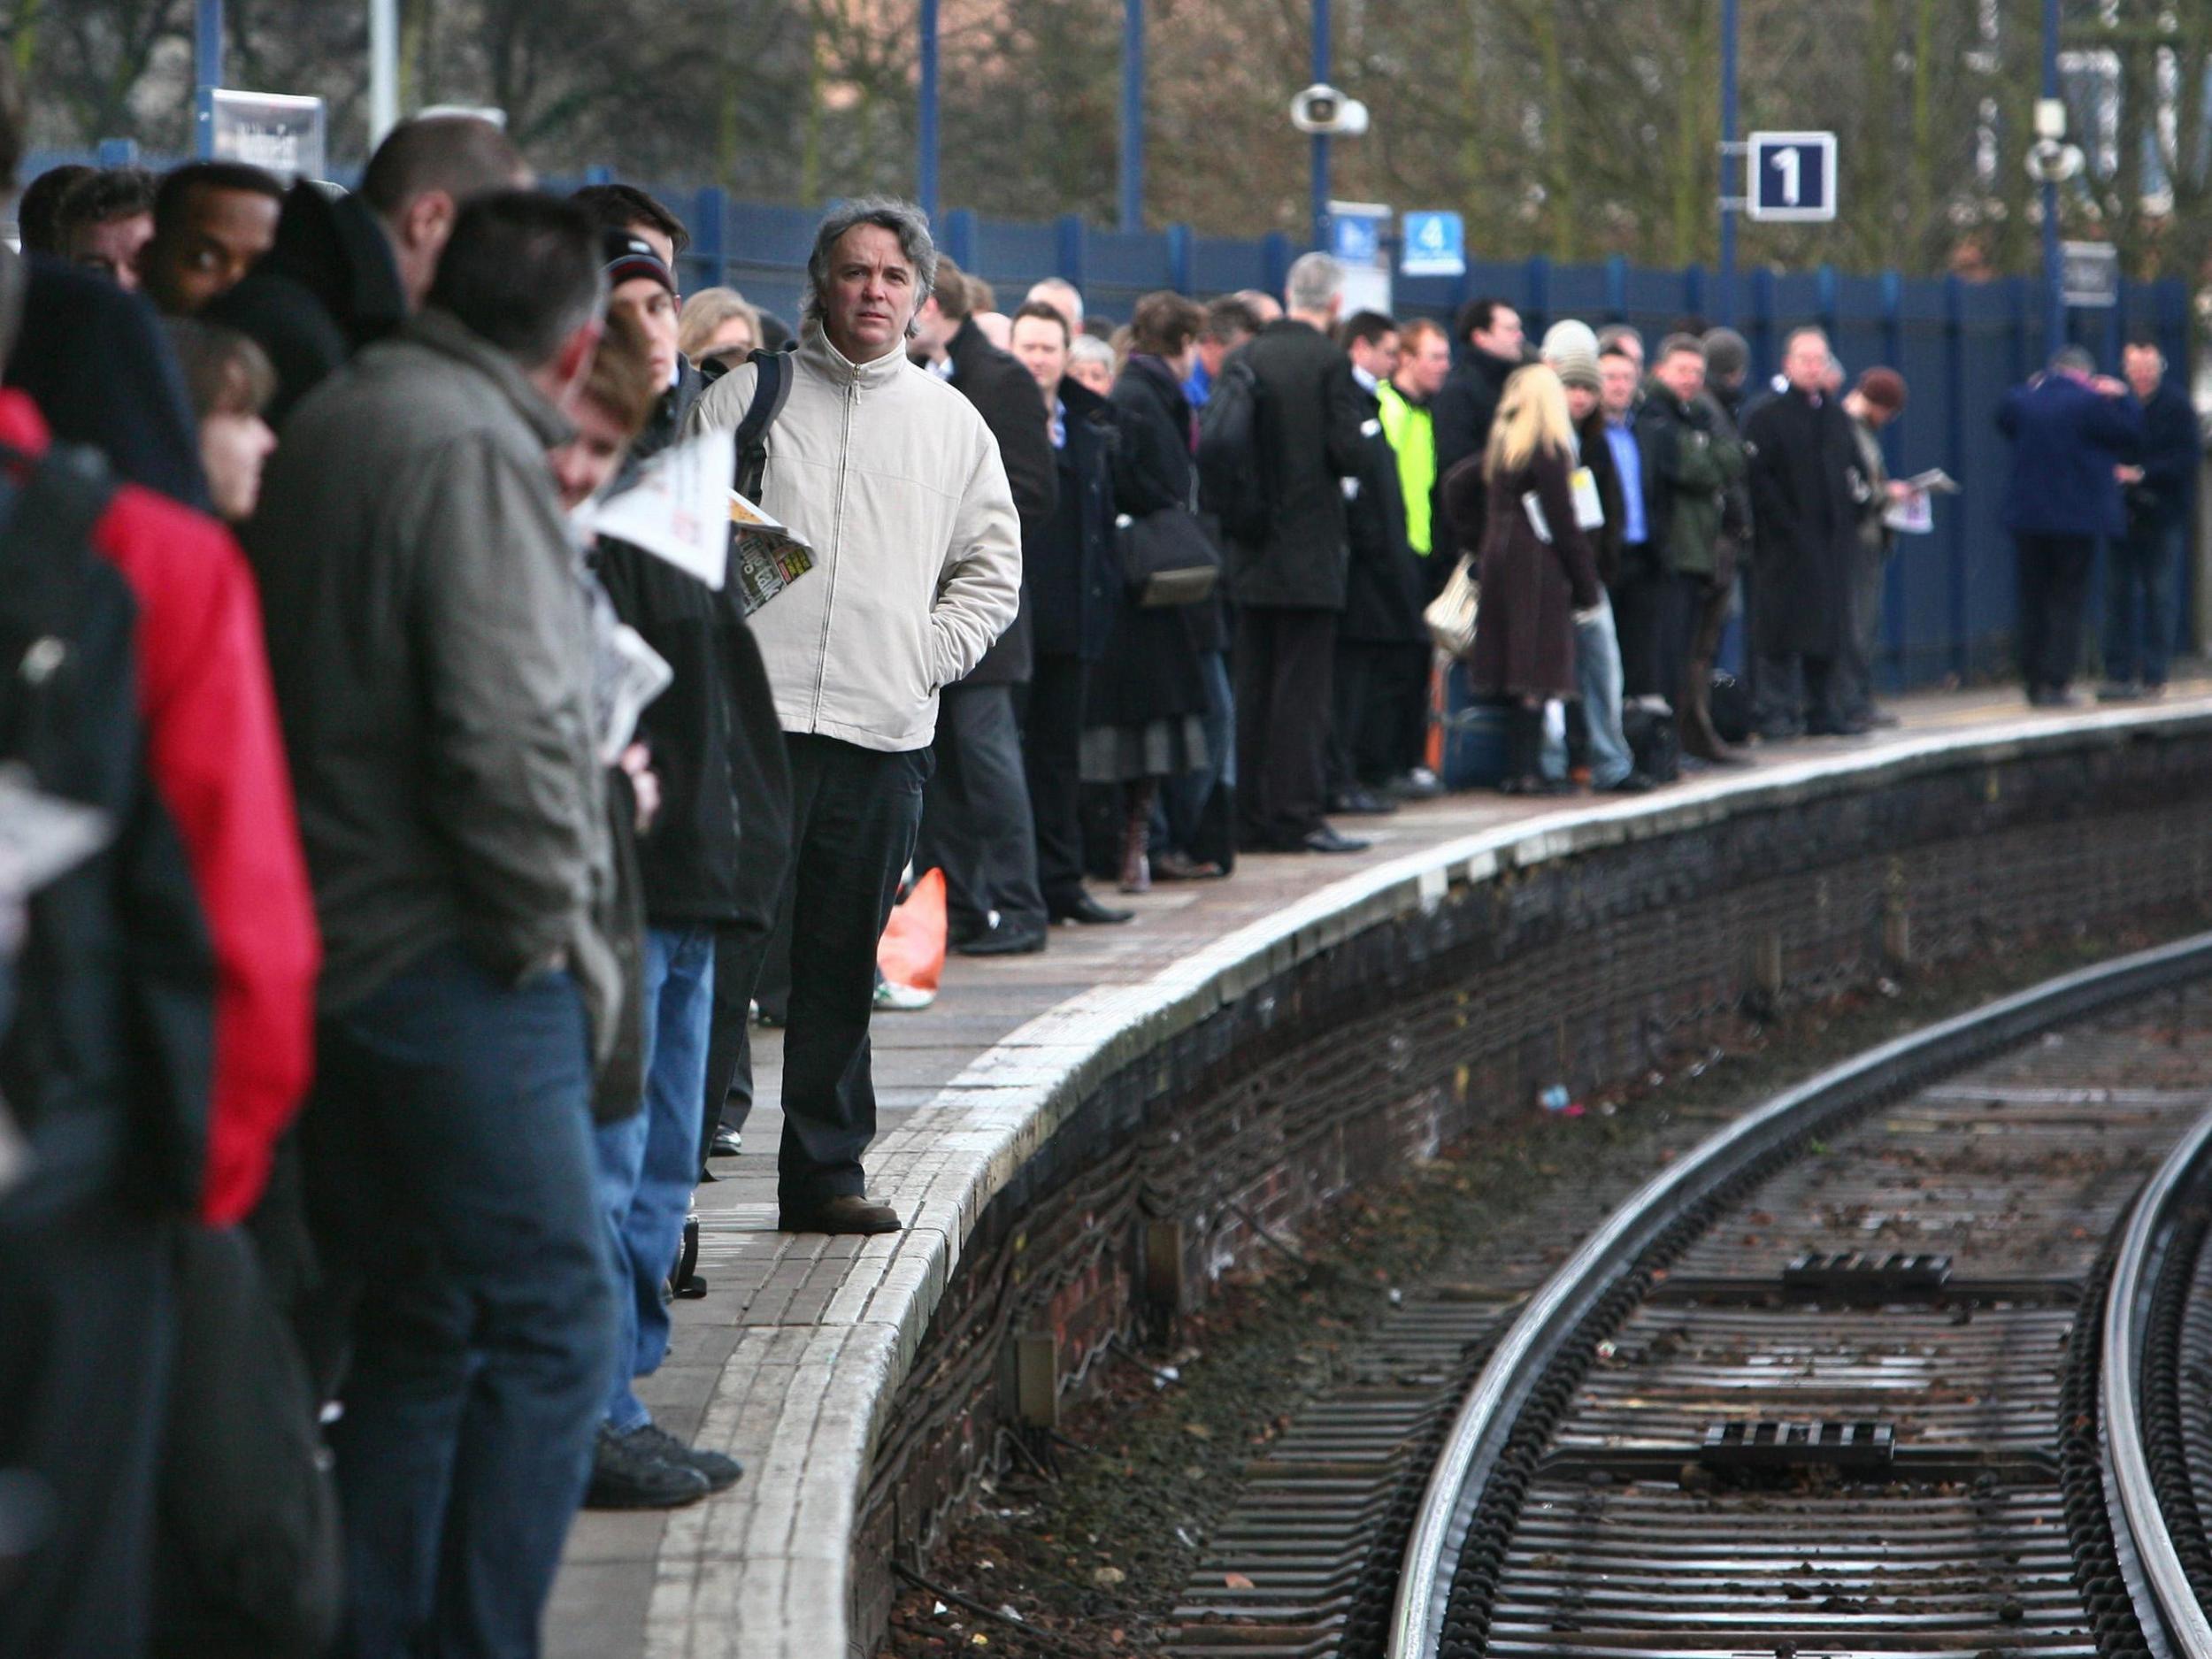 Commuters waiting on a platform as up to 2,000 workers at three rail companies will go on strike in separate disputes over staffing, threatening some of the worst disruption since the industry was privatised